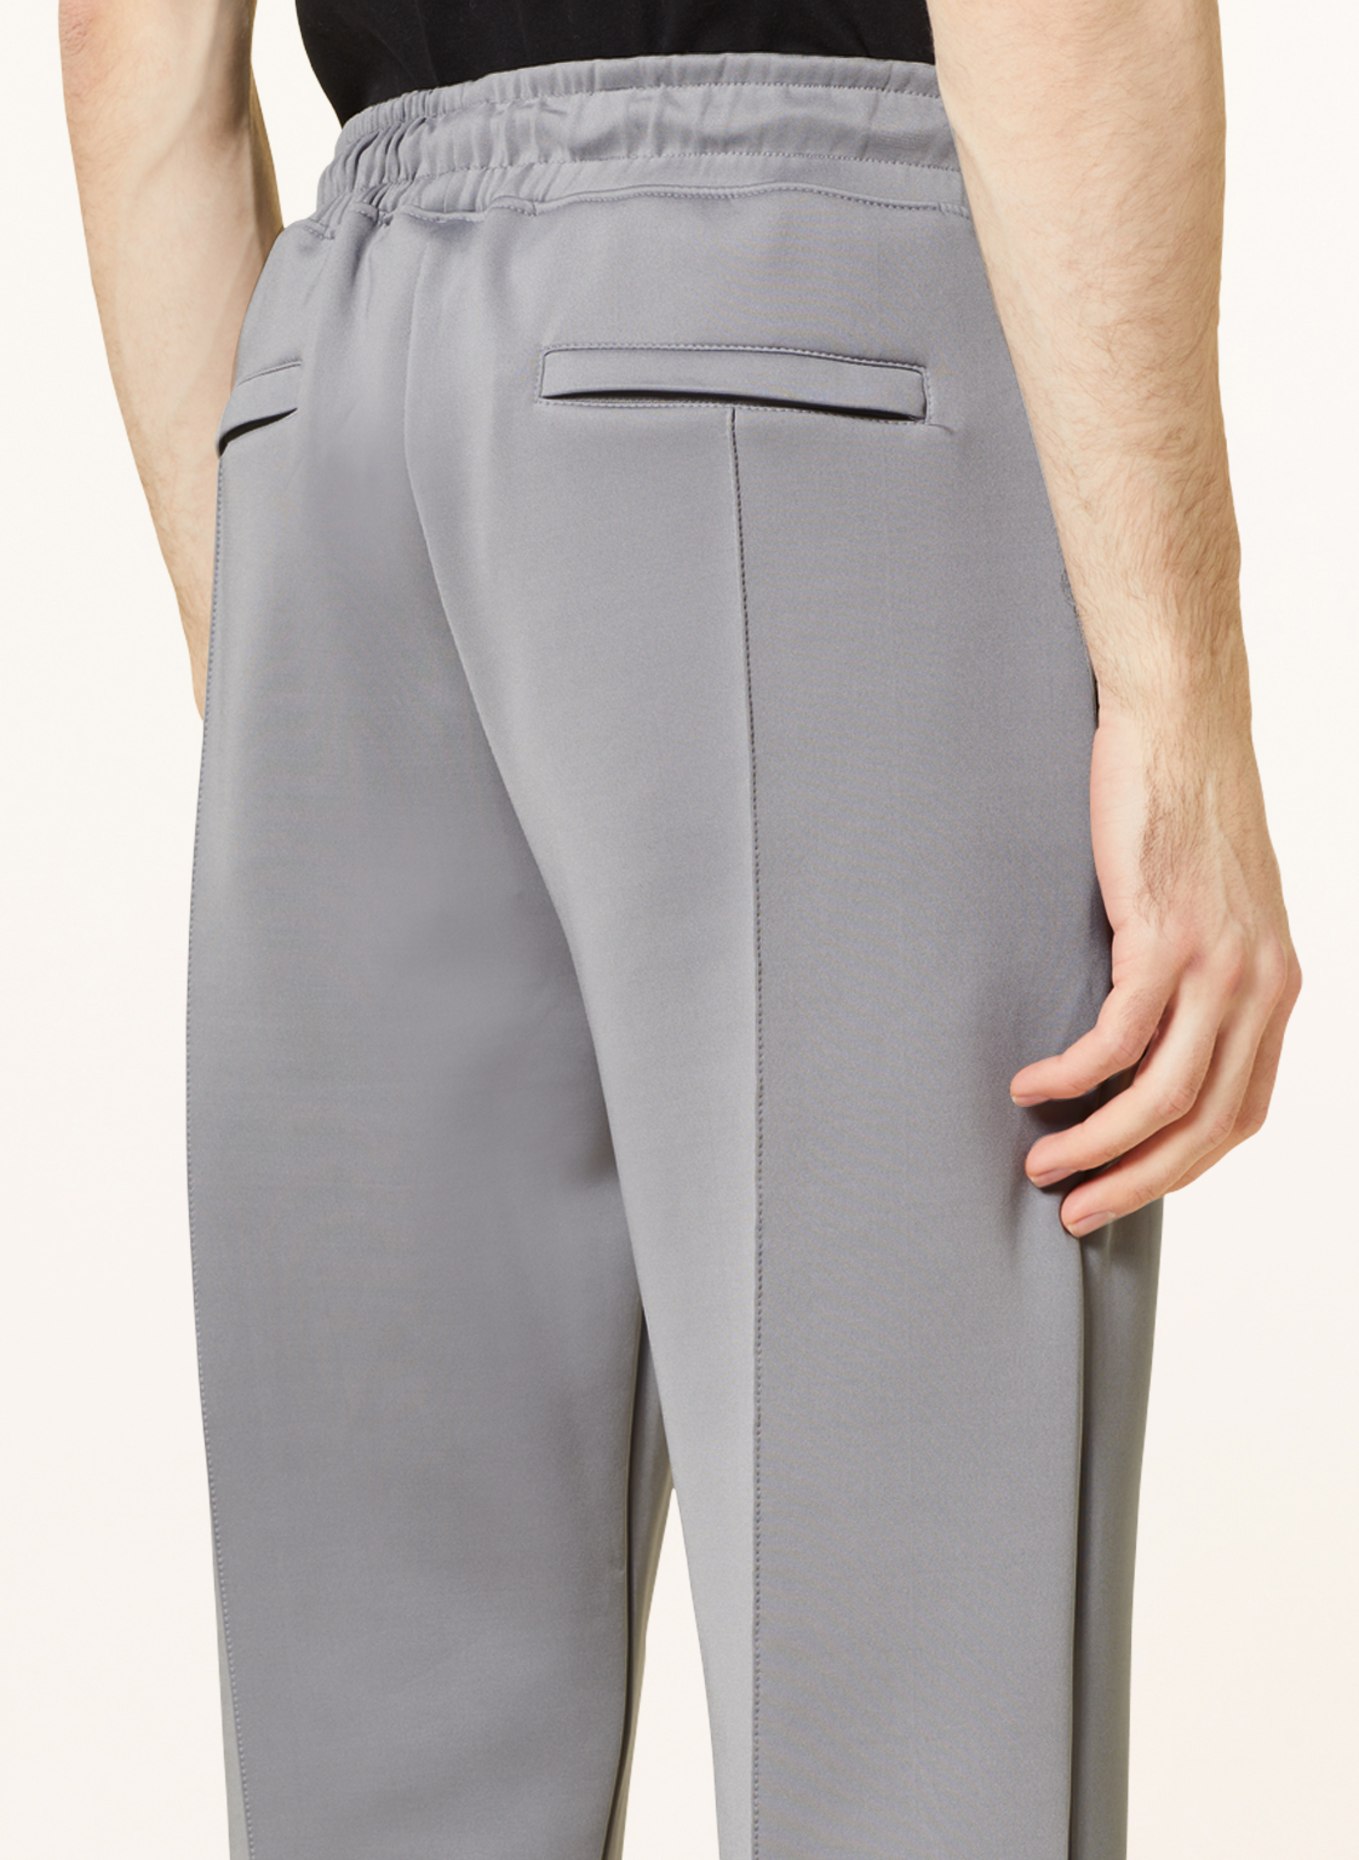 PEGADOR Pants in jogger style, Color: GRAY (Image 6)